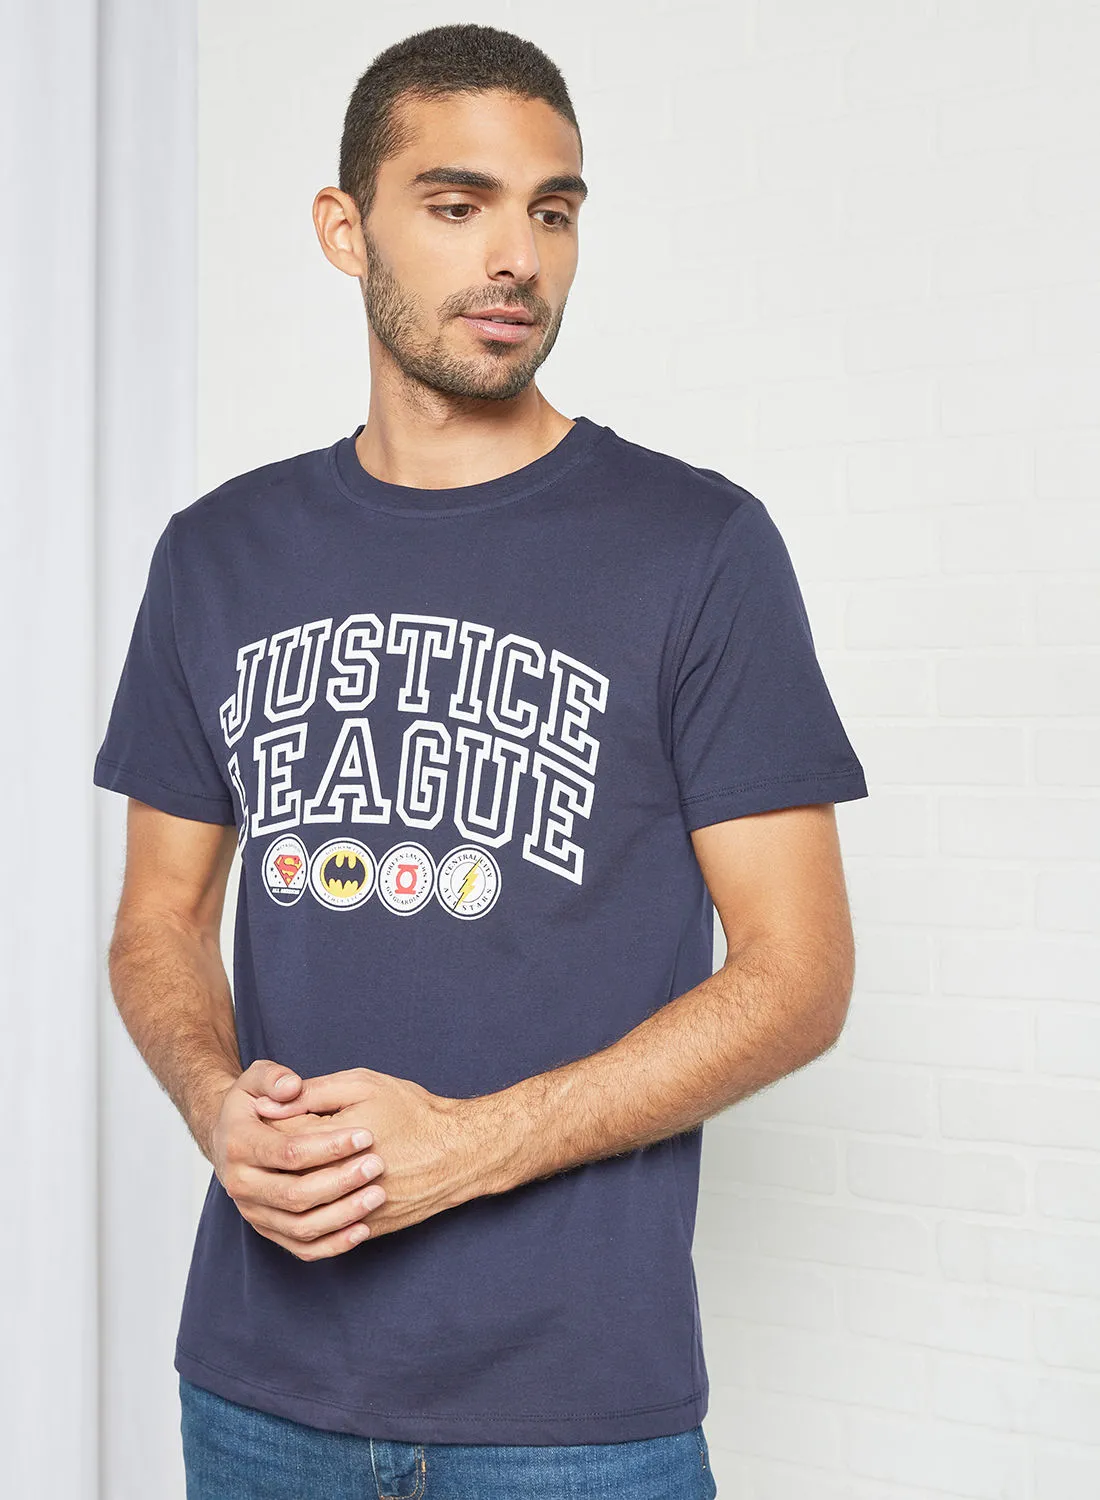 STATE 8 Justice League Print T-Shirt Navy